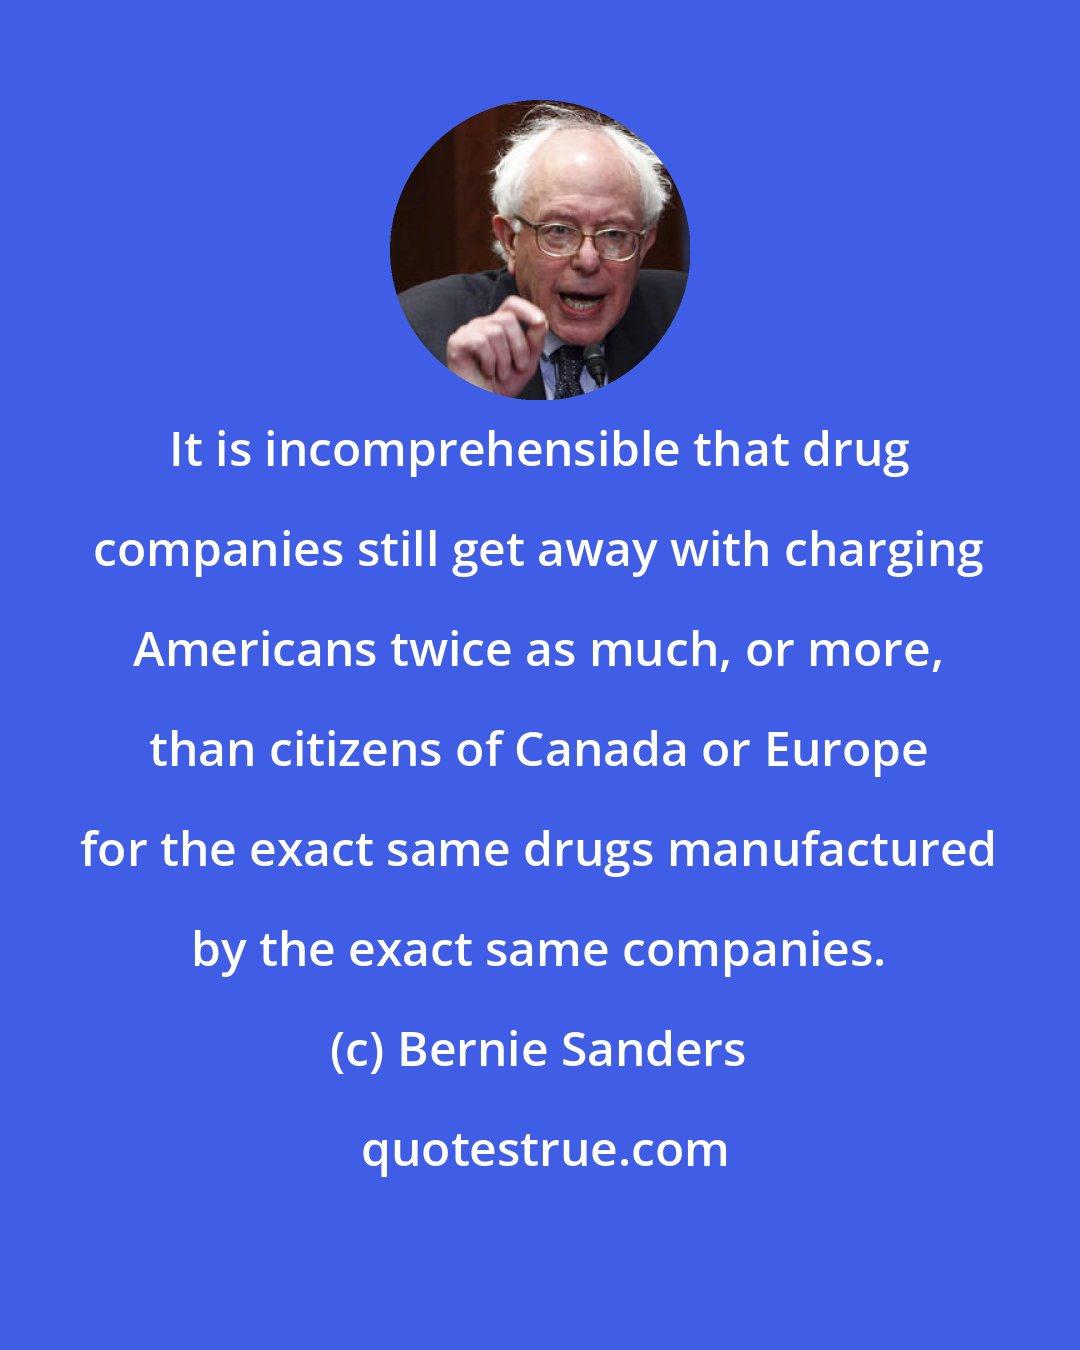 Bernie Sanders: It is incomprehensible that drug companies still get away with charging Americans twice as much, or more, than citizens of Canada or Europe for the exact same drugs manufactured by the exact same companies.